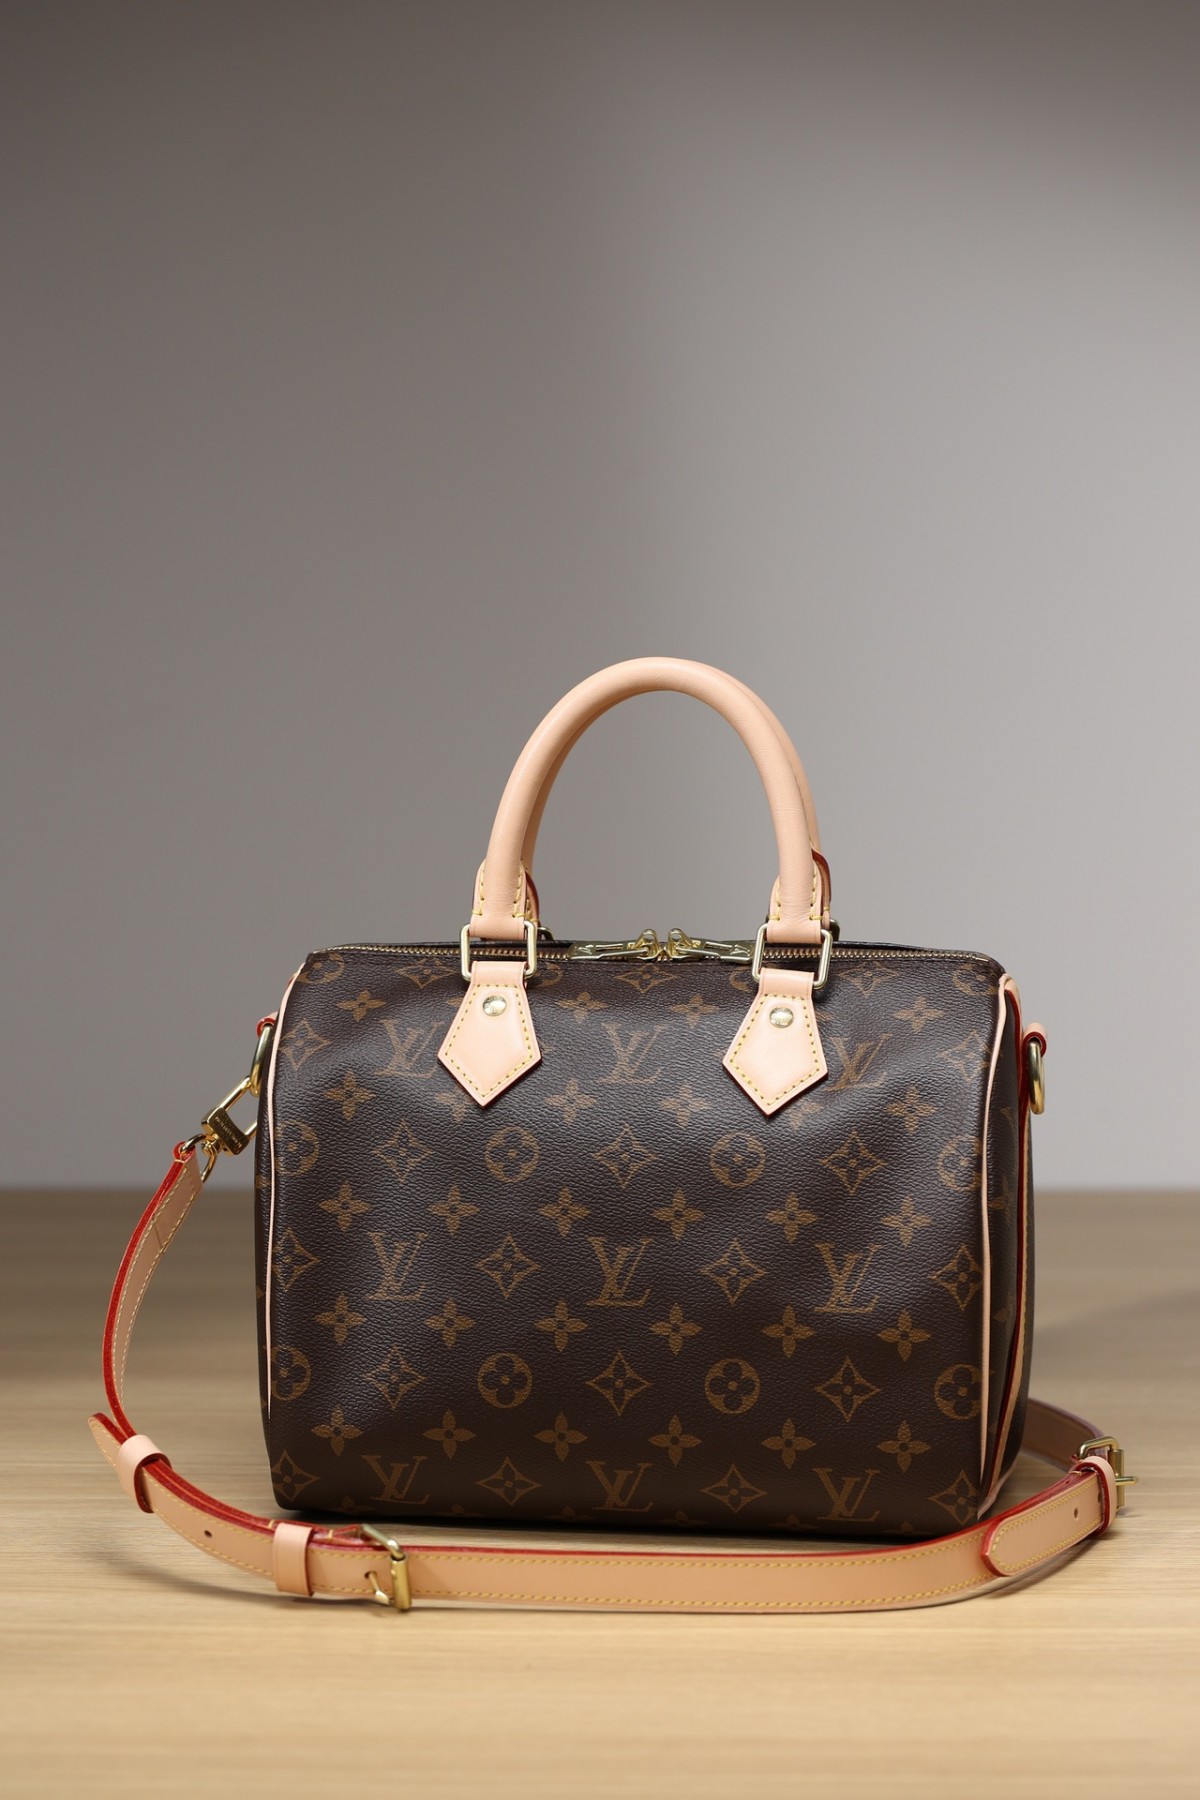 How good quality is a M41113 Speedy 25 bag? (2023 Updated)-Best Quality Fake Louis Vuitton Bag Online Store, Replica designer bag ru